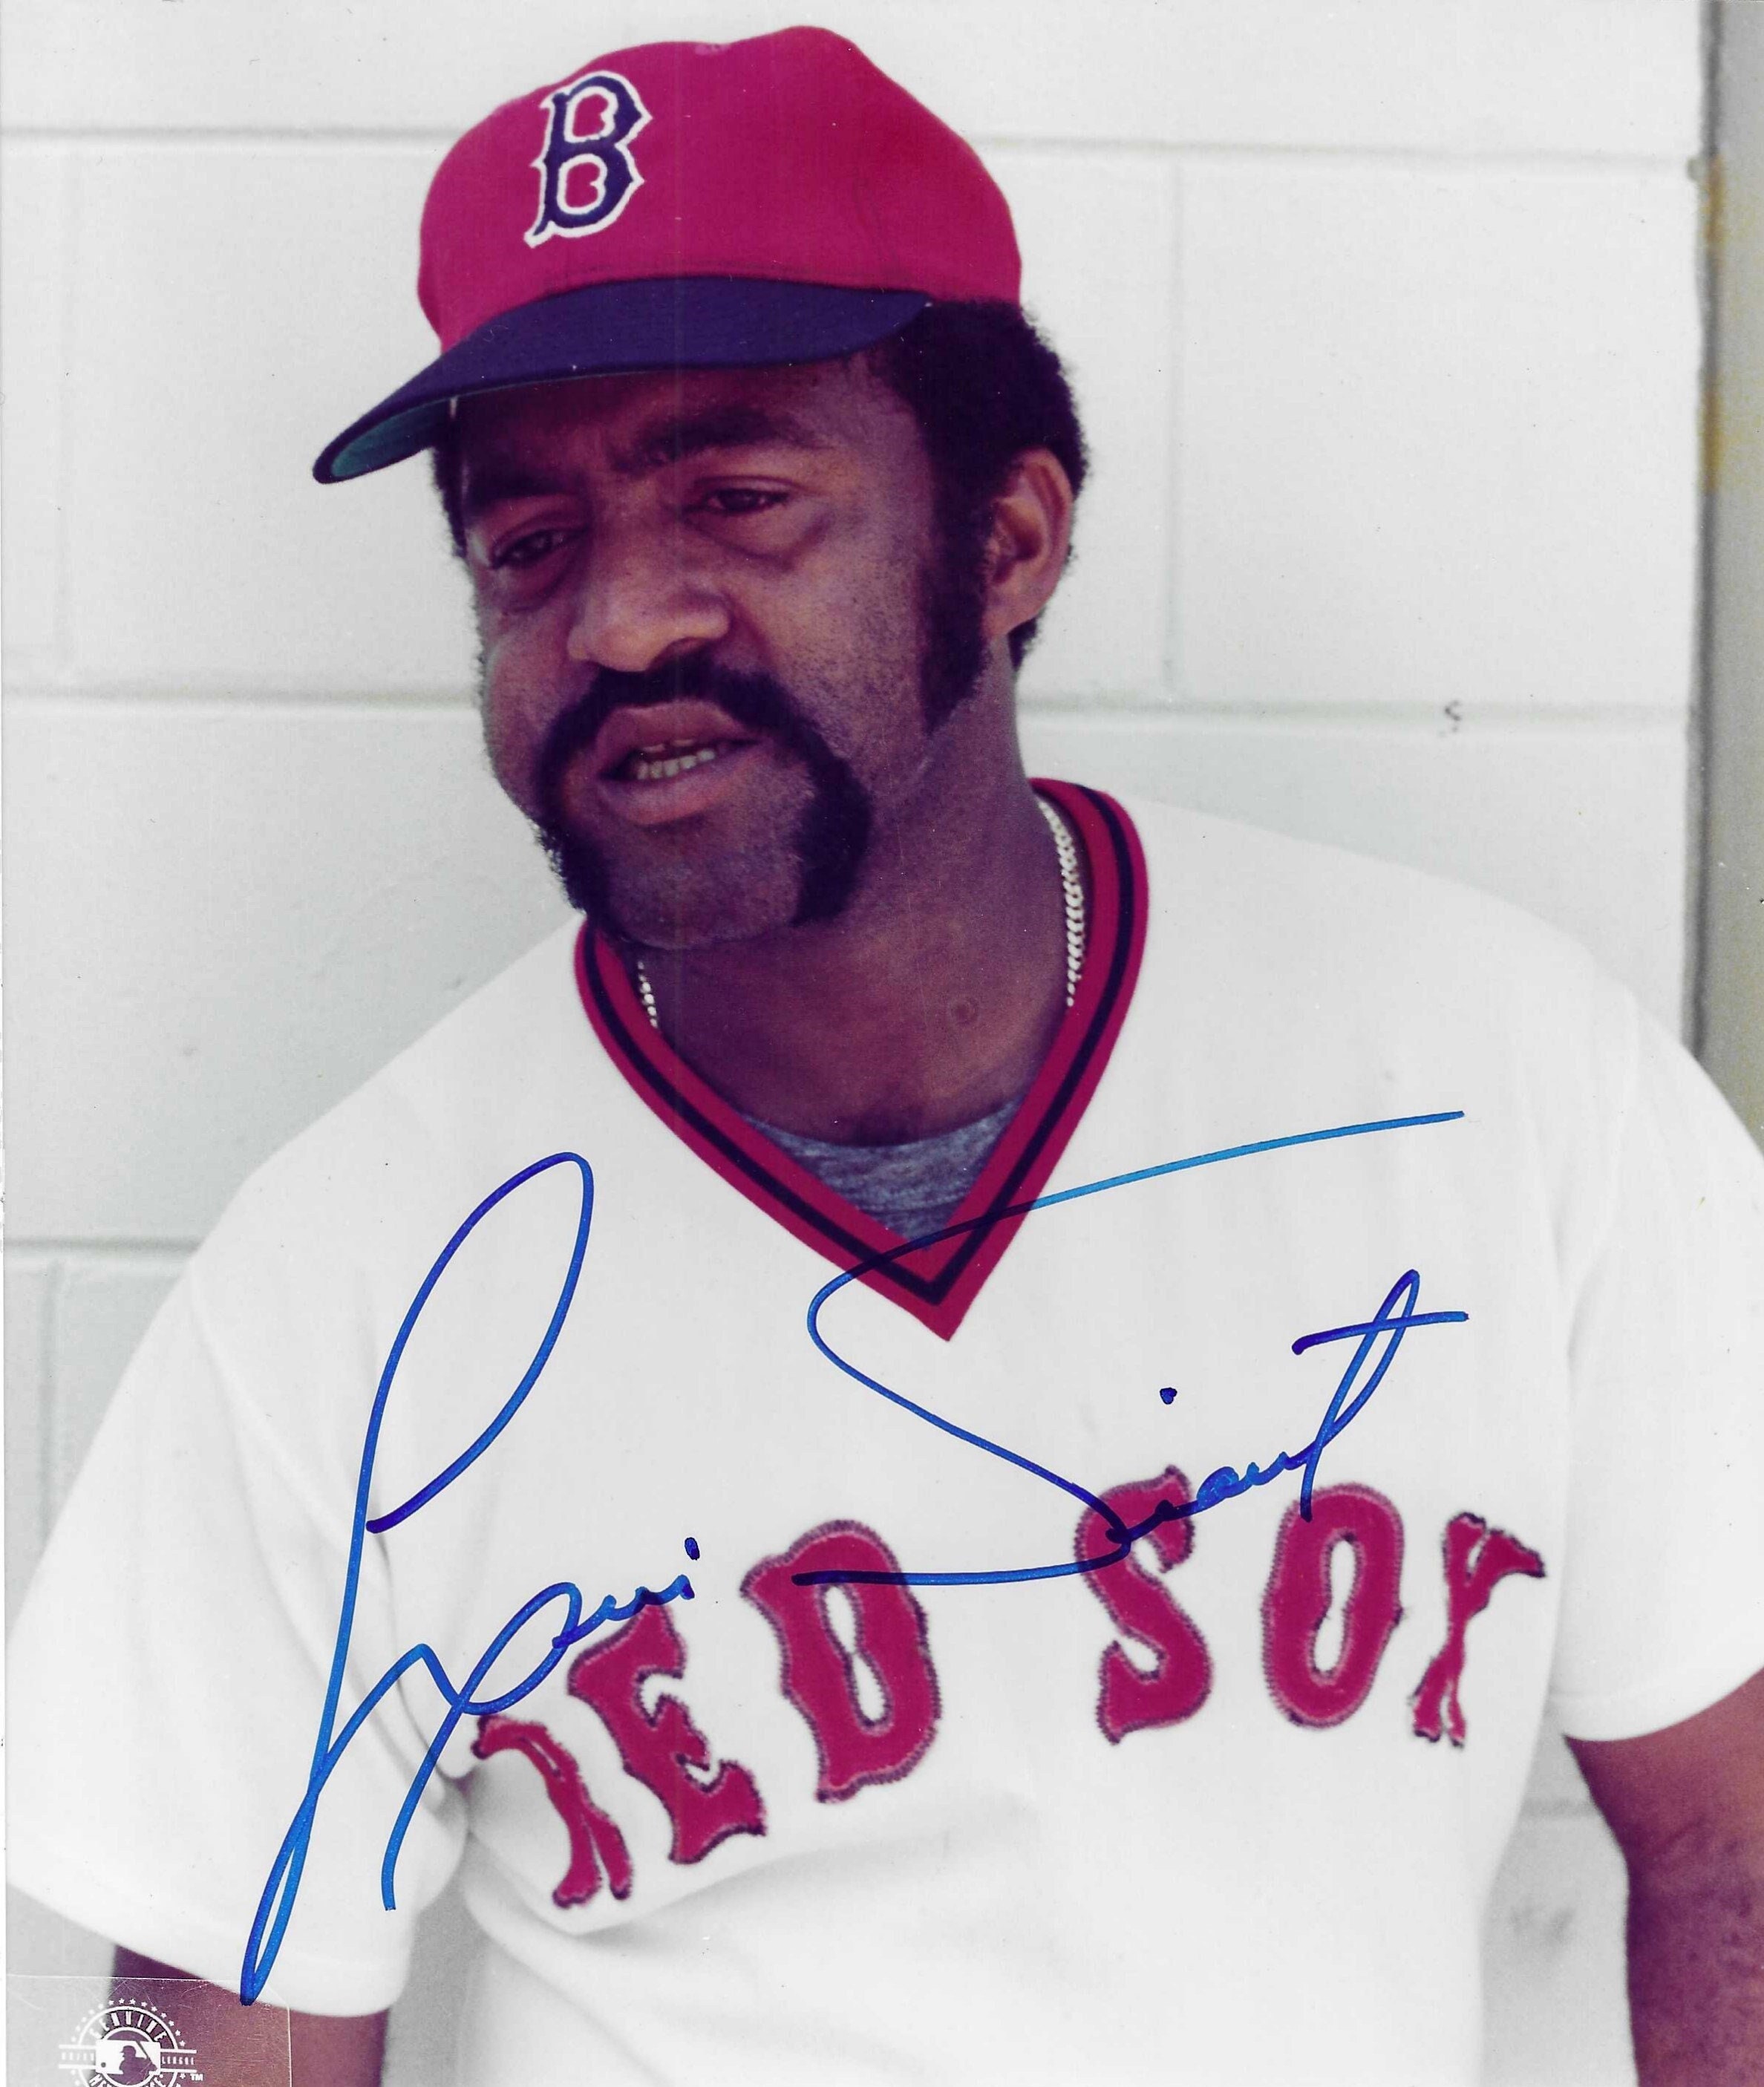 Should Luis Tiant be in the Hall of Fame? : r/redsox